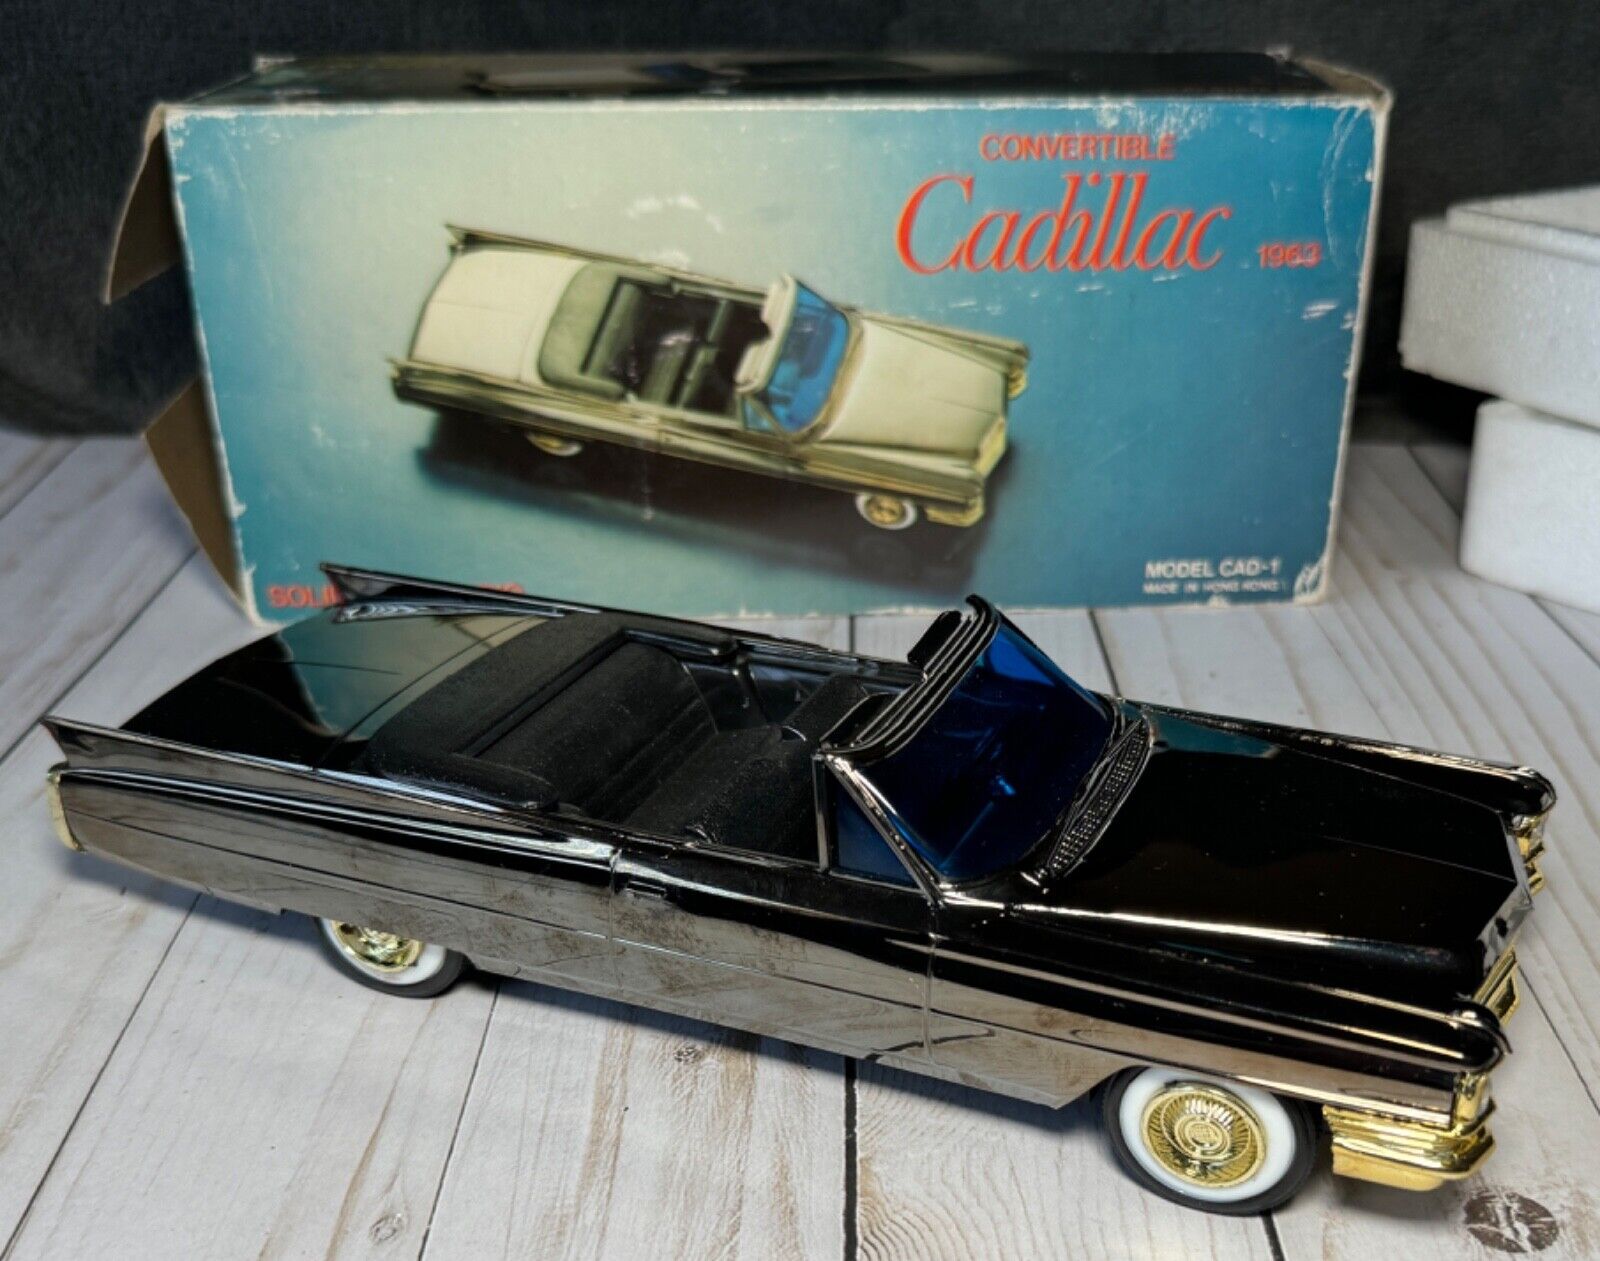 Vintage 1963 Cadillac Convertible Solid State Radio CAD-1  works